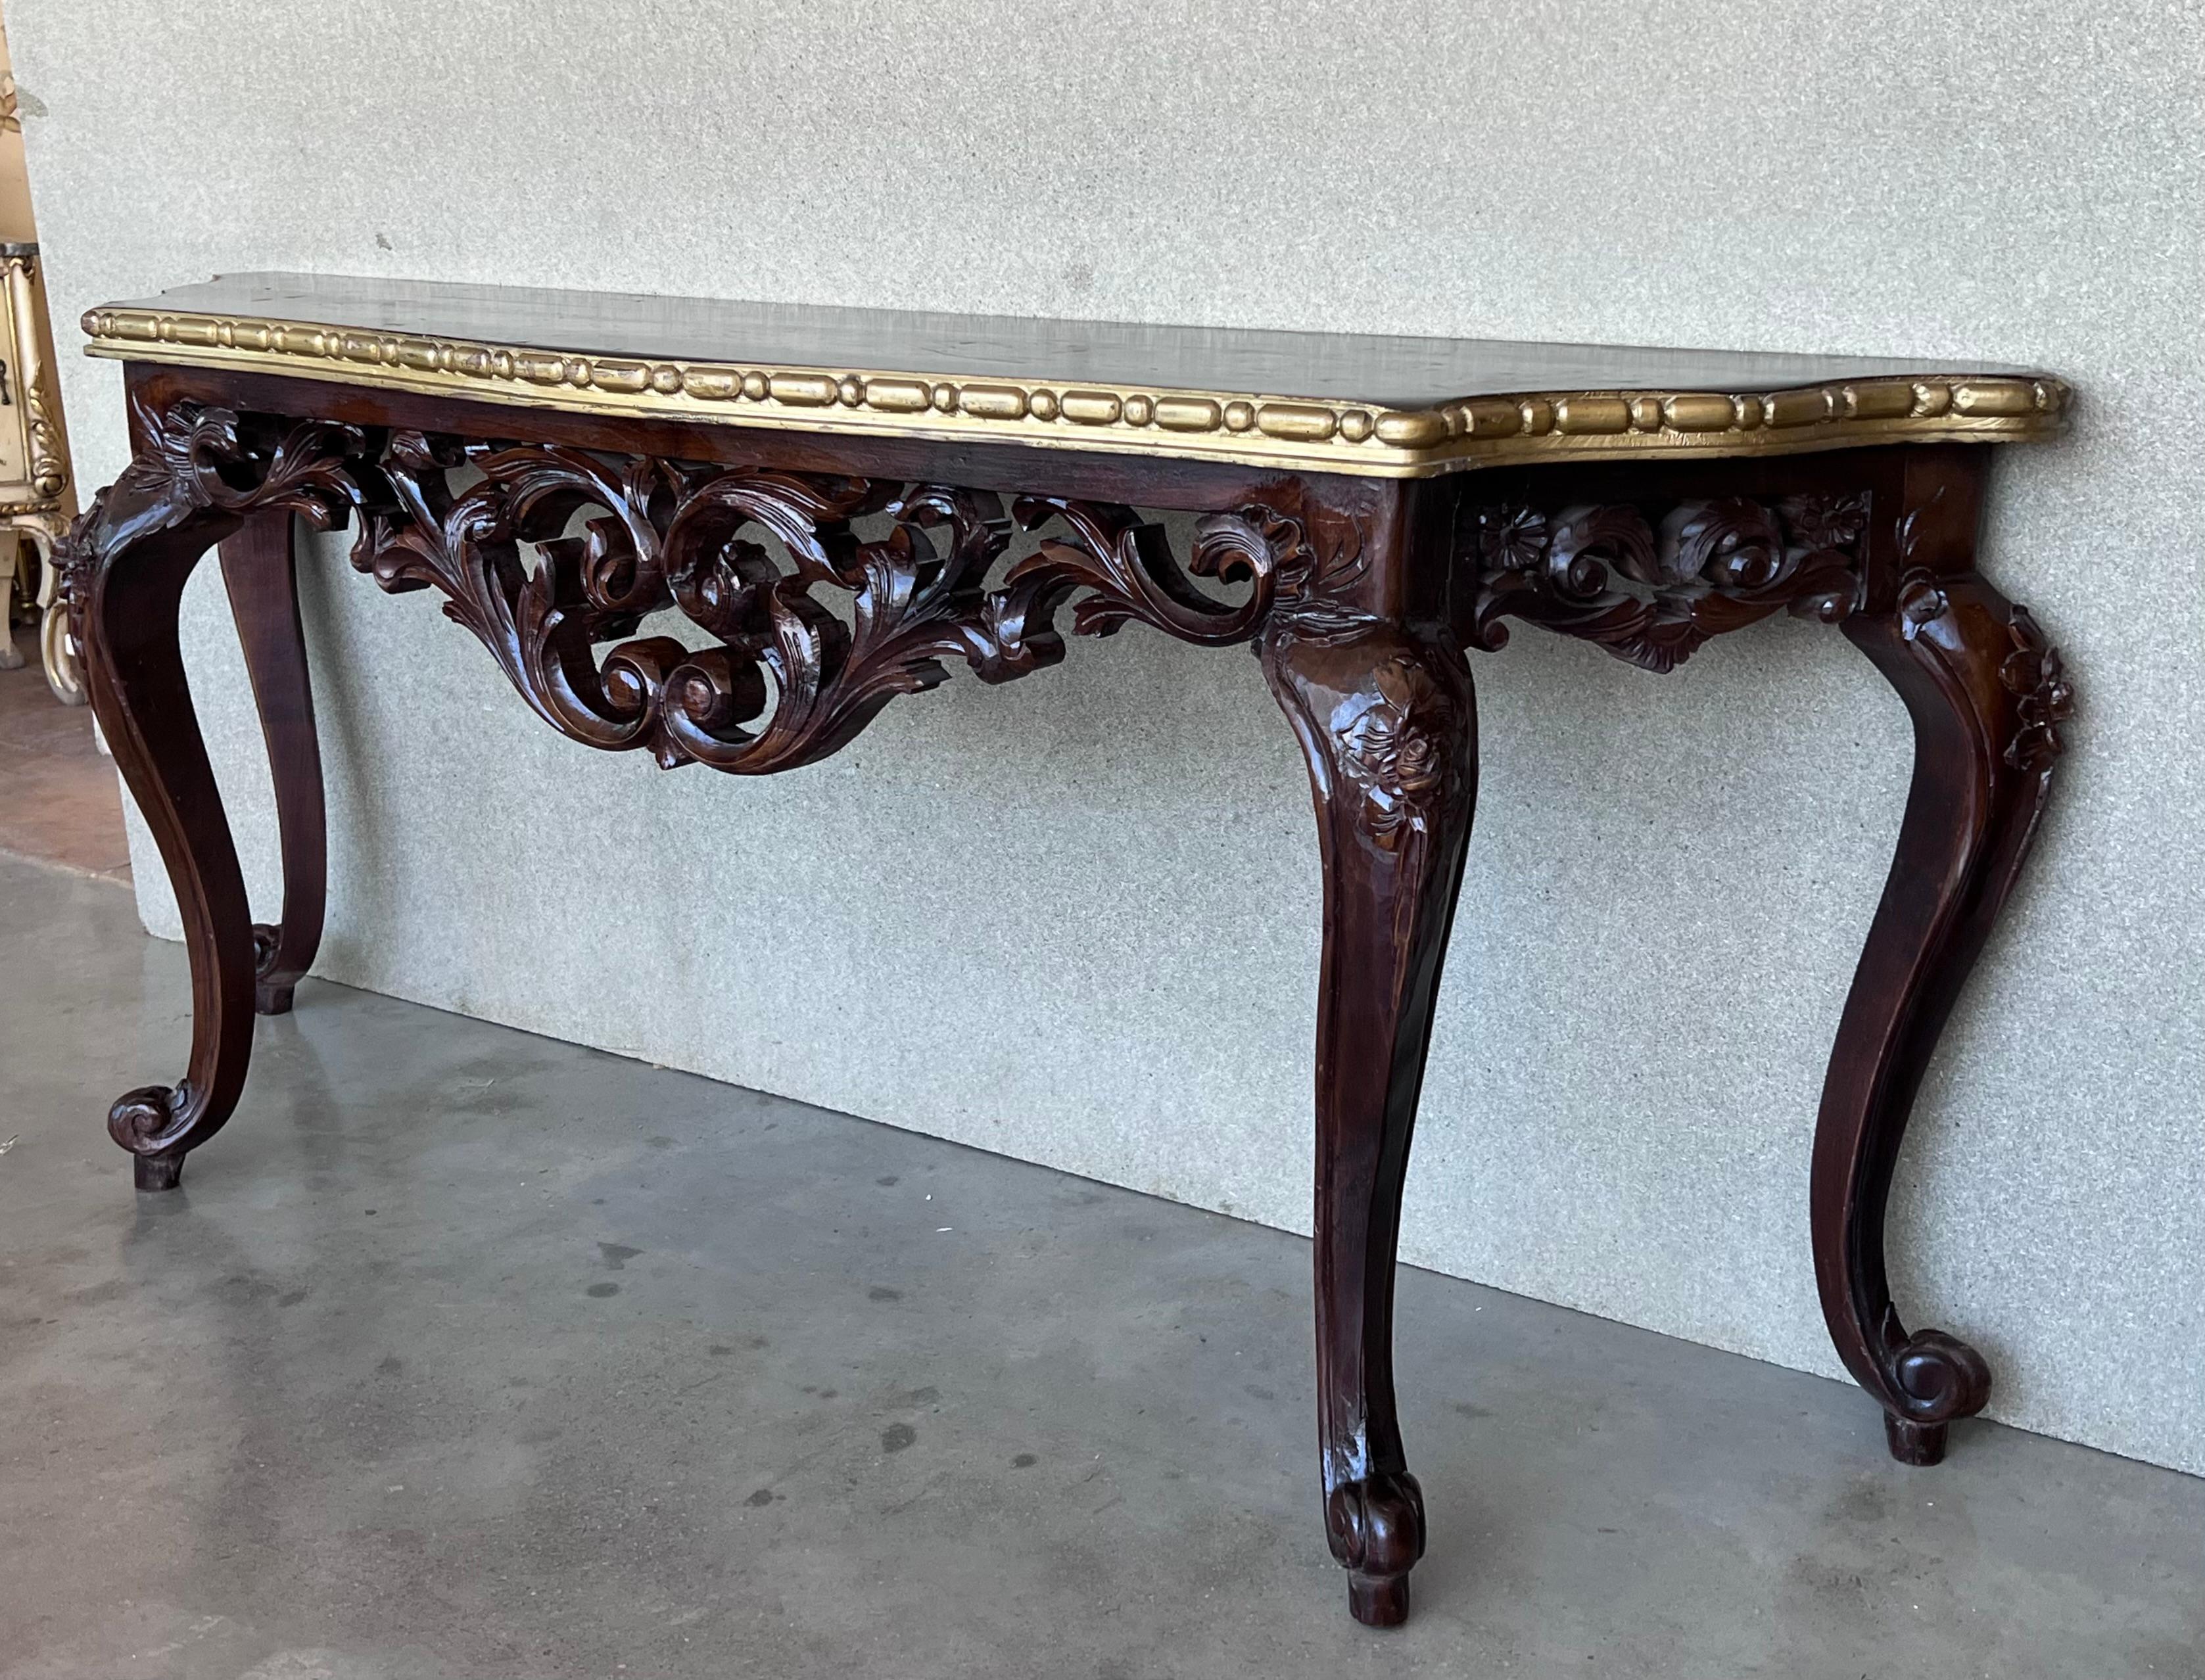 20th French Regency carved walnut console table with gilted edges 

20th century French Regence style beautifully carved with leaves walnut console. Wood top with carved front, over hand-carved frieze supported by four cabriole legs. Very massive